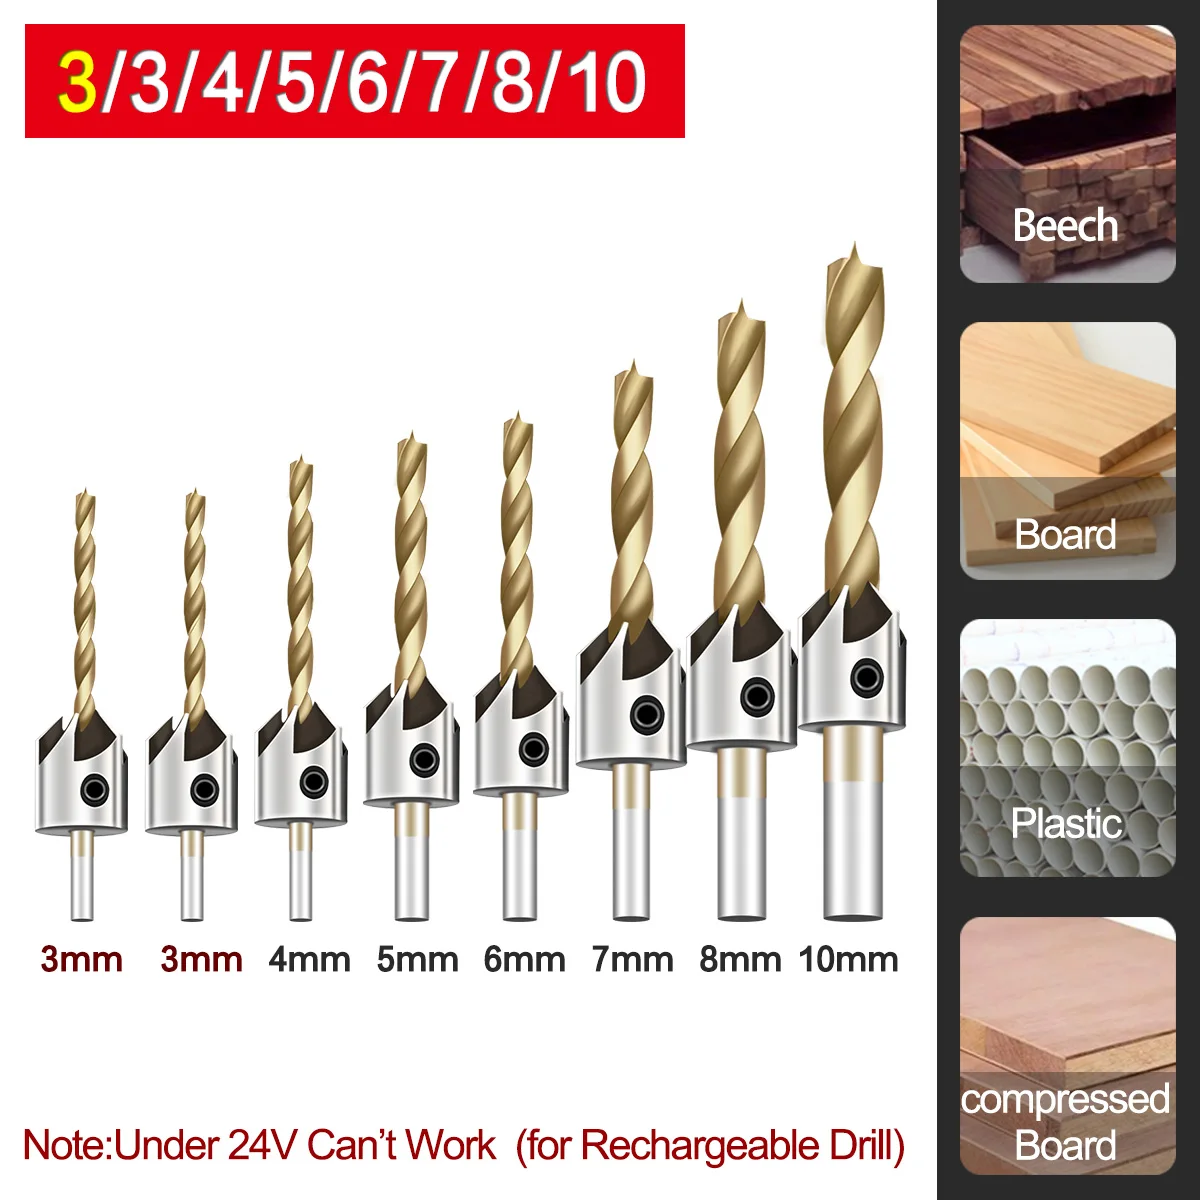 YGY-YGY 7pcs 3mm-10mm 5 Flutes Countersink Drill Bit Set HSS Carpentry Reamer Woodworking Chamfer Drill Drill